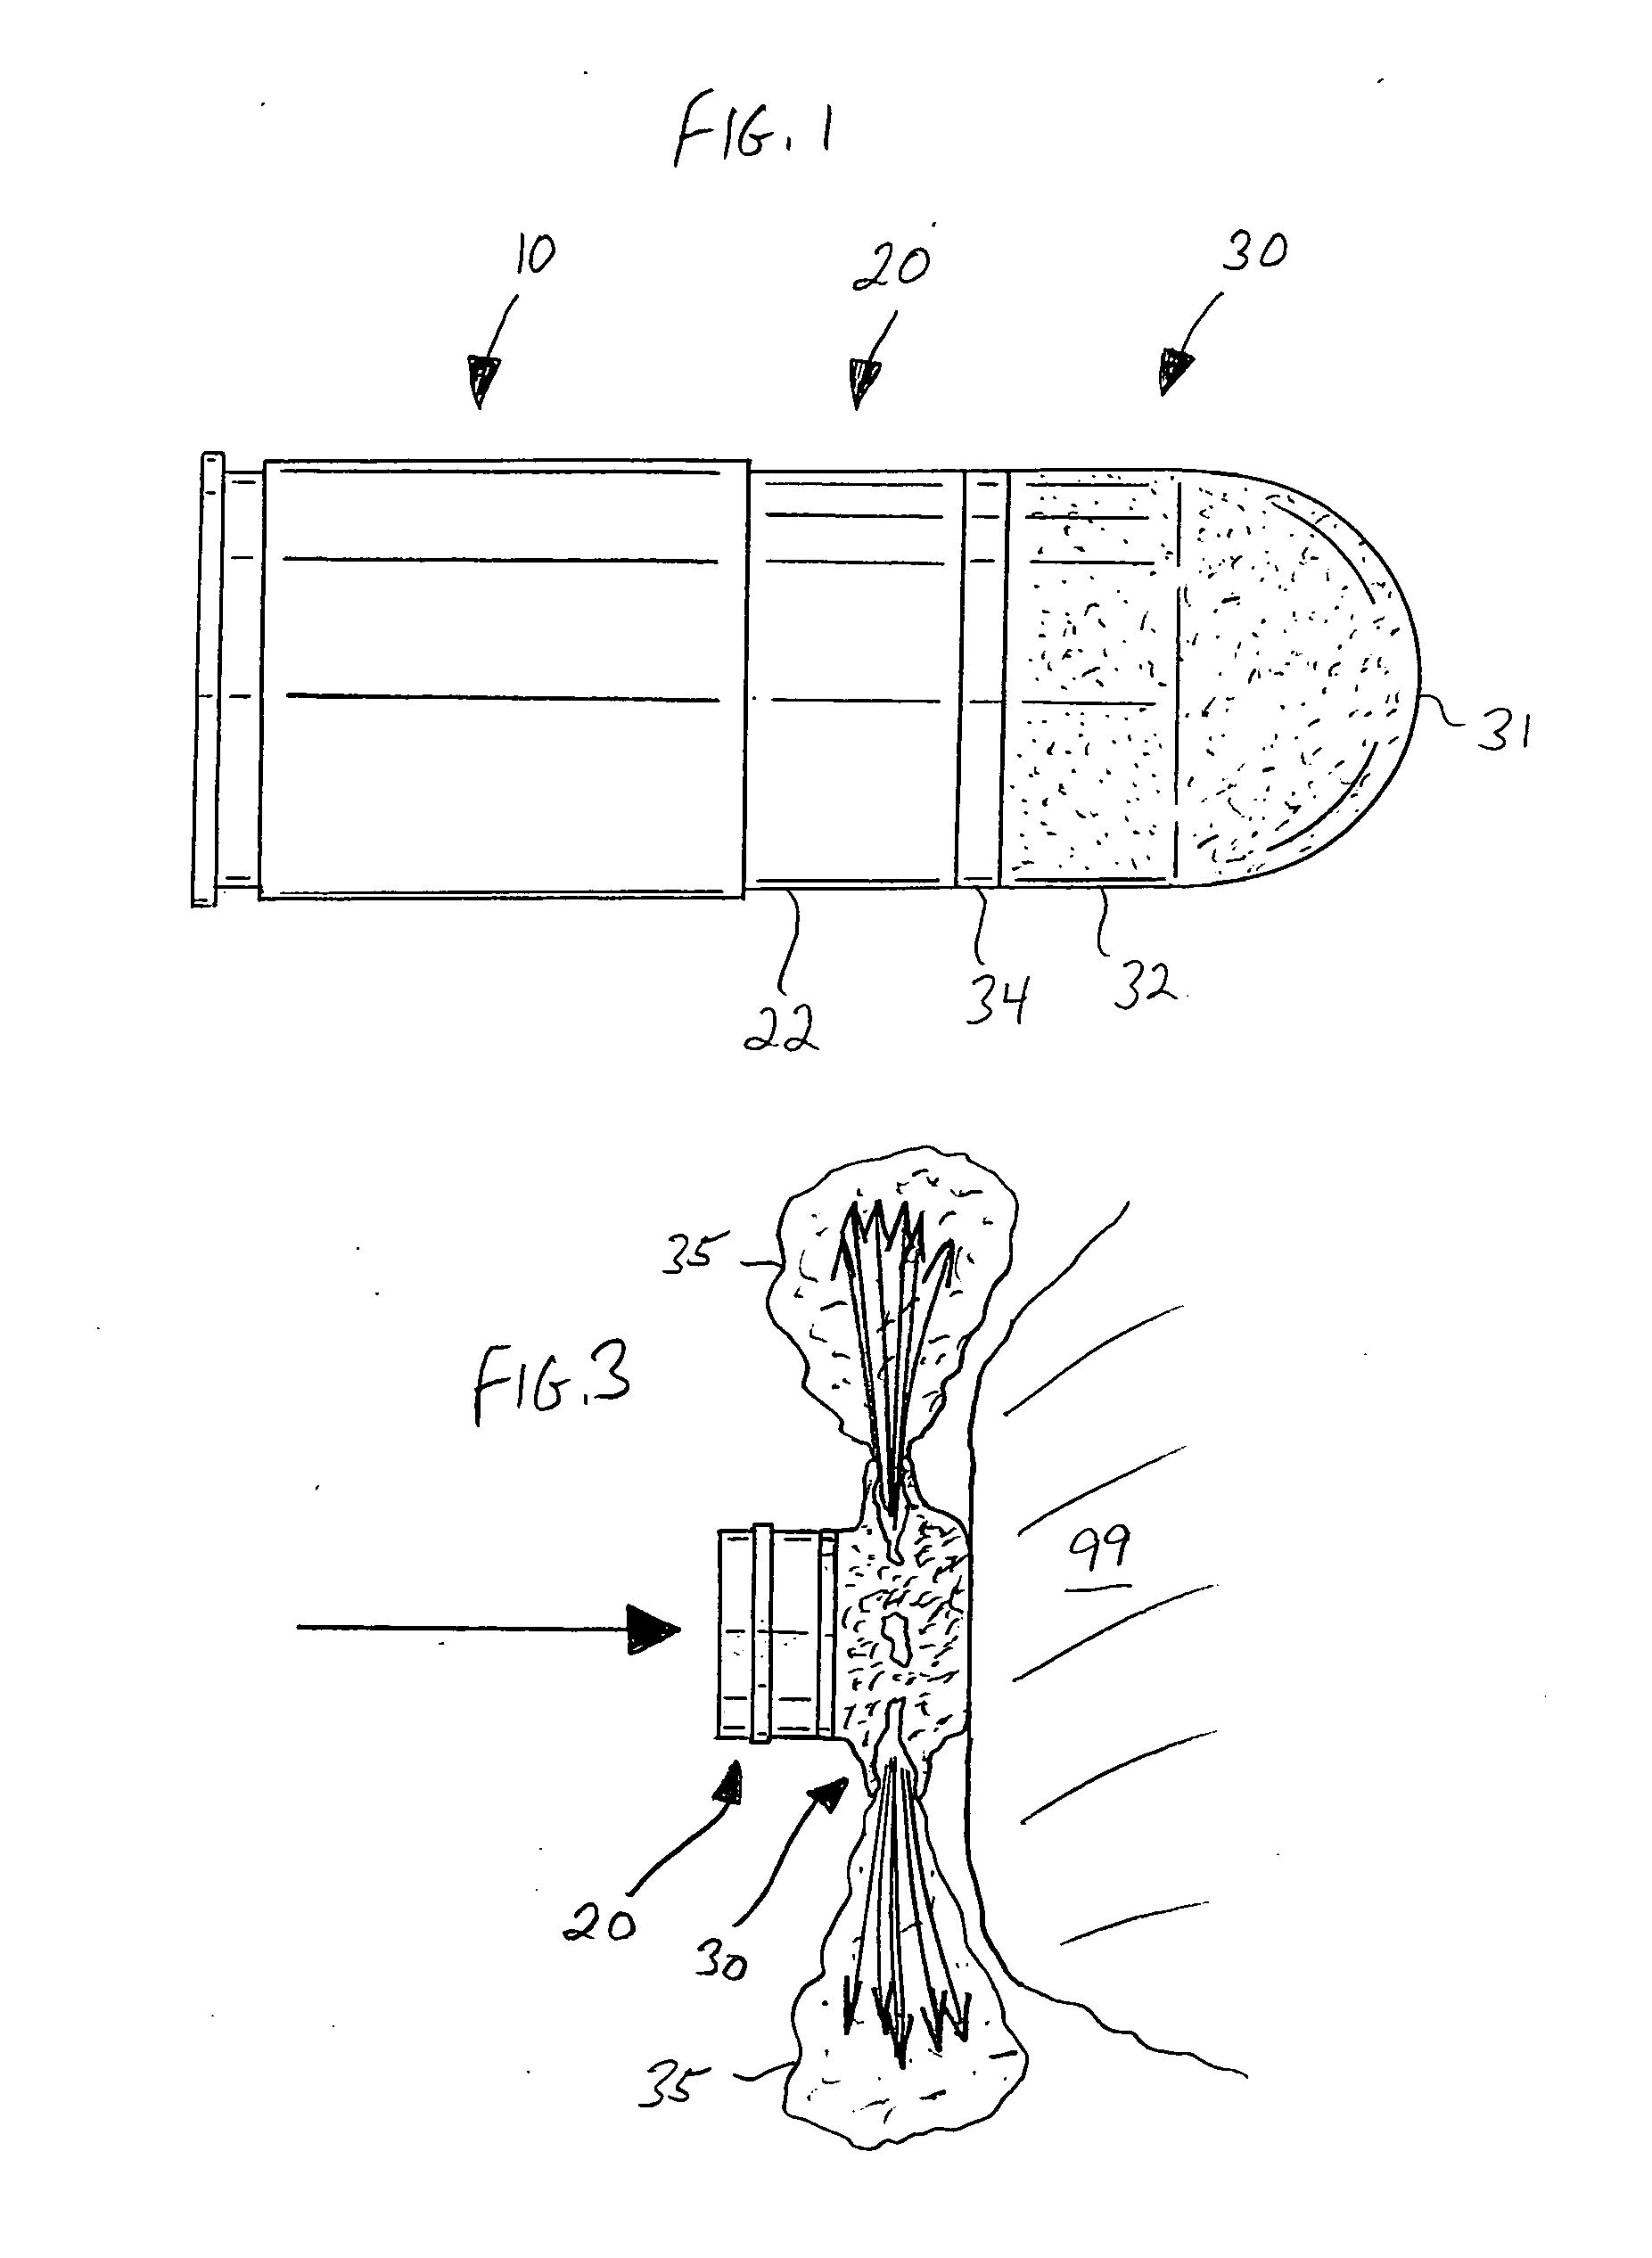 Frangible non-lethal projectile